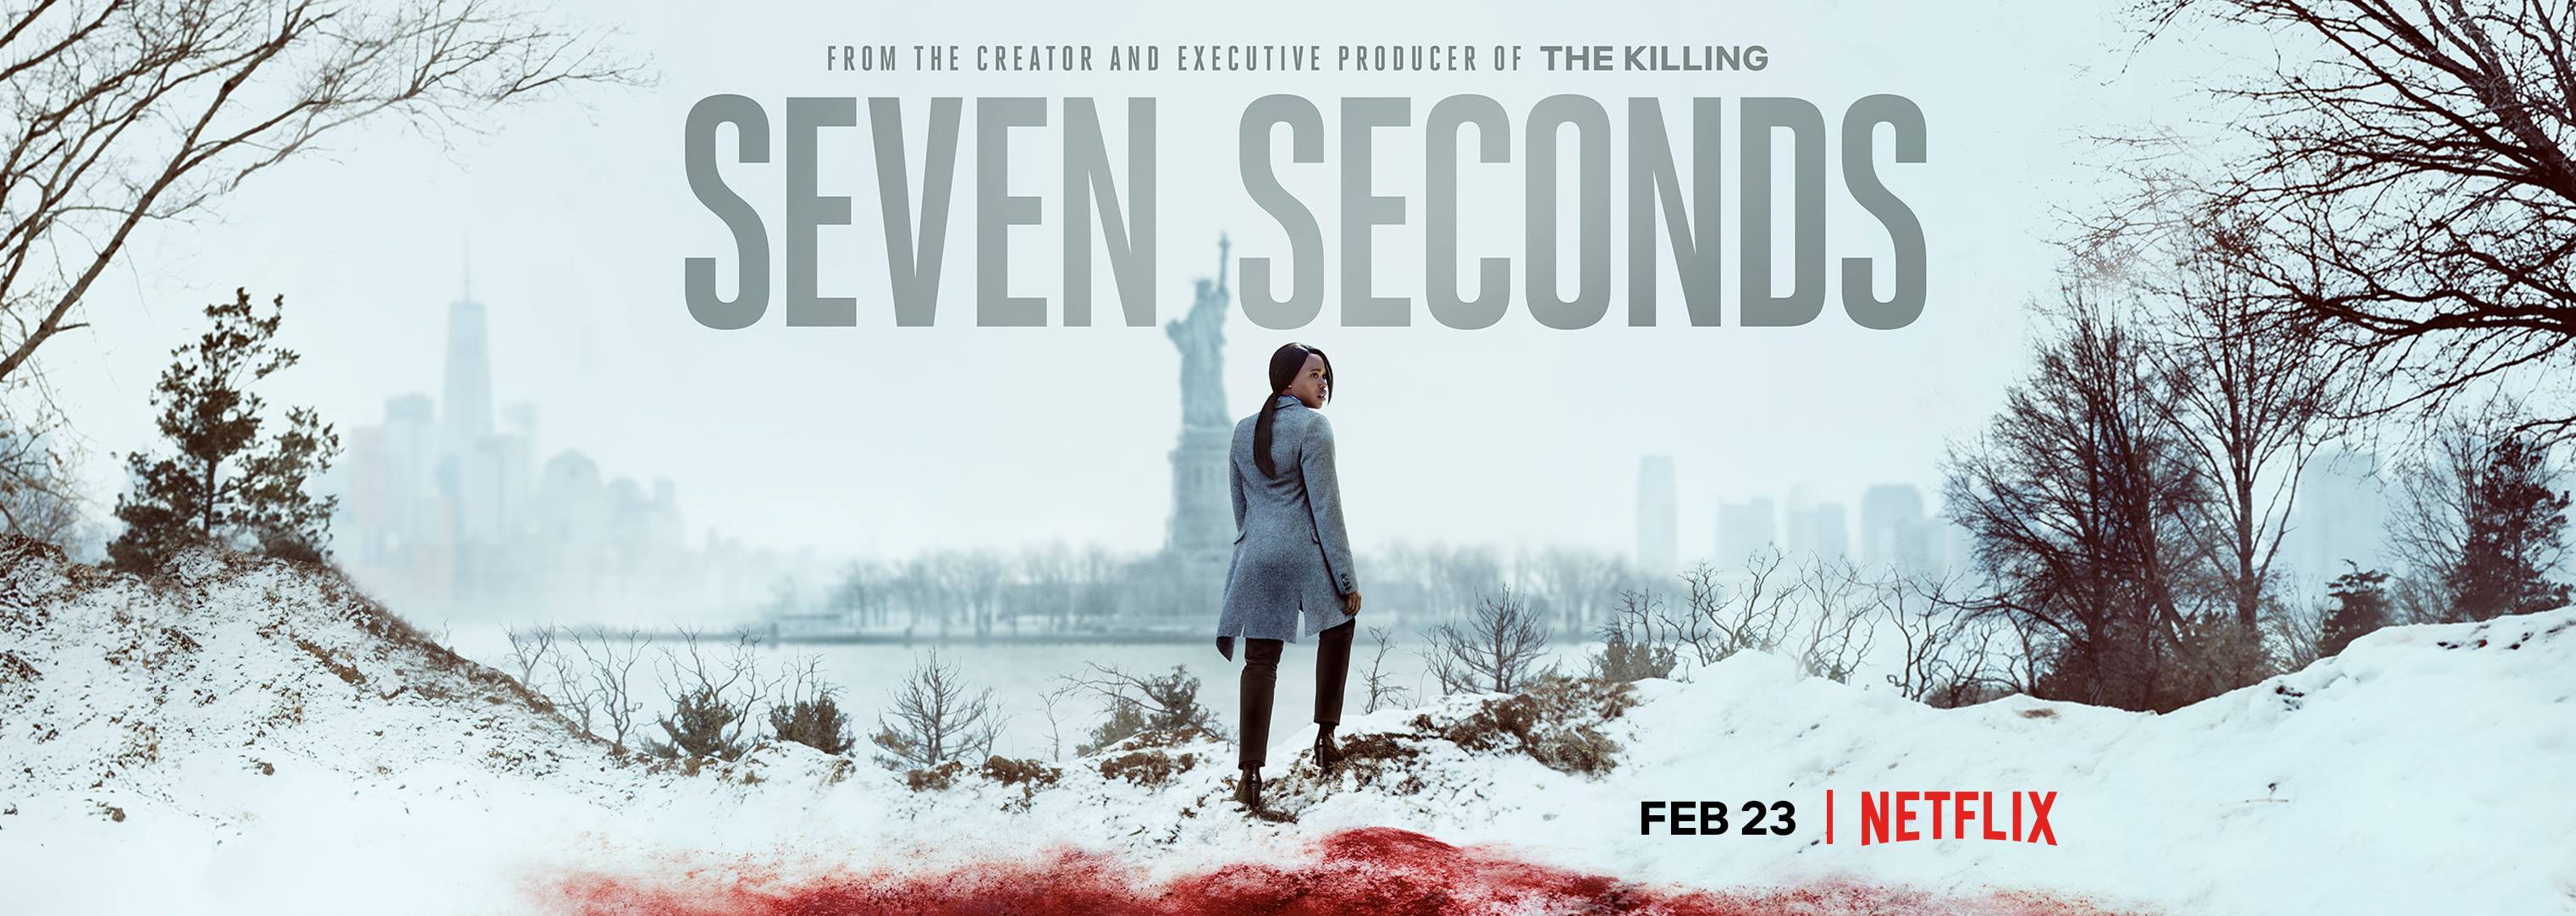 Netflix's Seven Seconds is the contrived, misery-riddled show I can't stop  watching - Vox